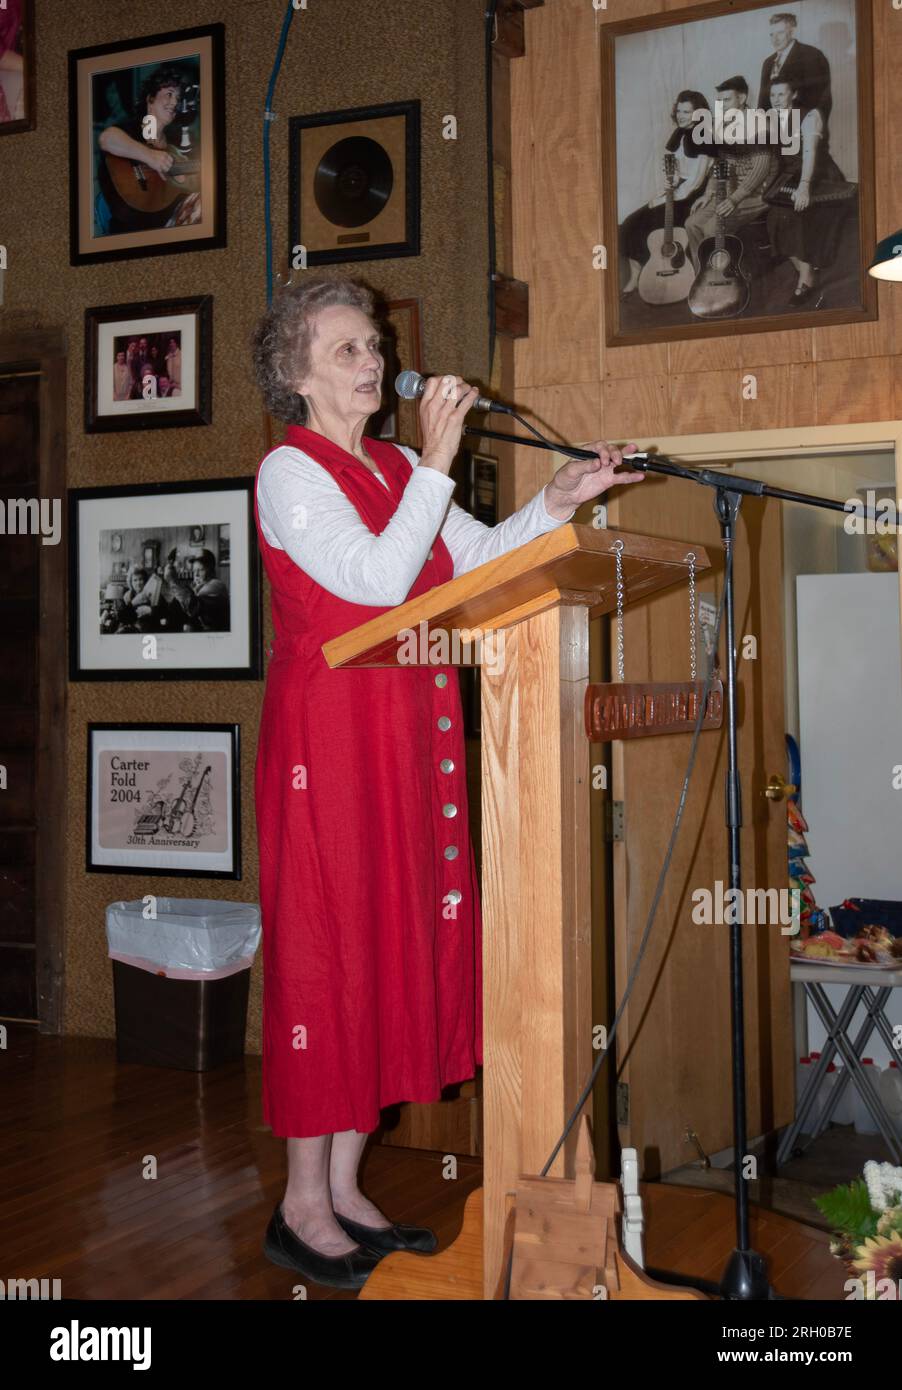 Rita Forrester, manager of The Carter Fold in Southwest Virginia, introduces a band performing at the concert venue. (see additional info) Stock Photo